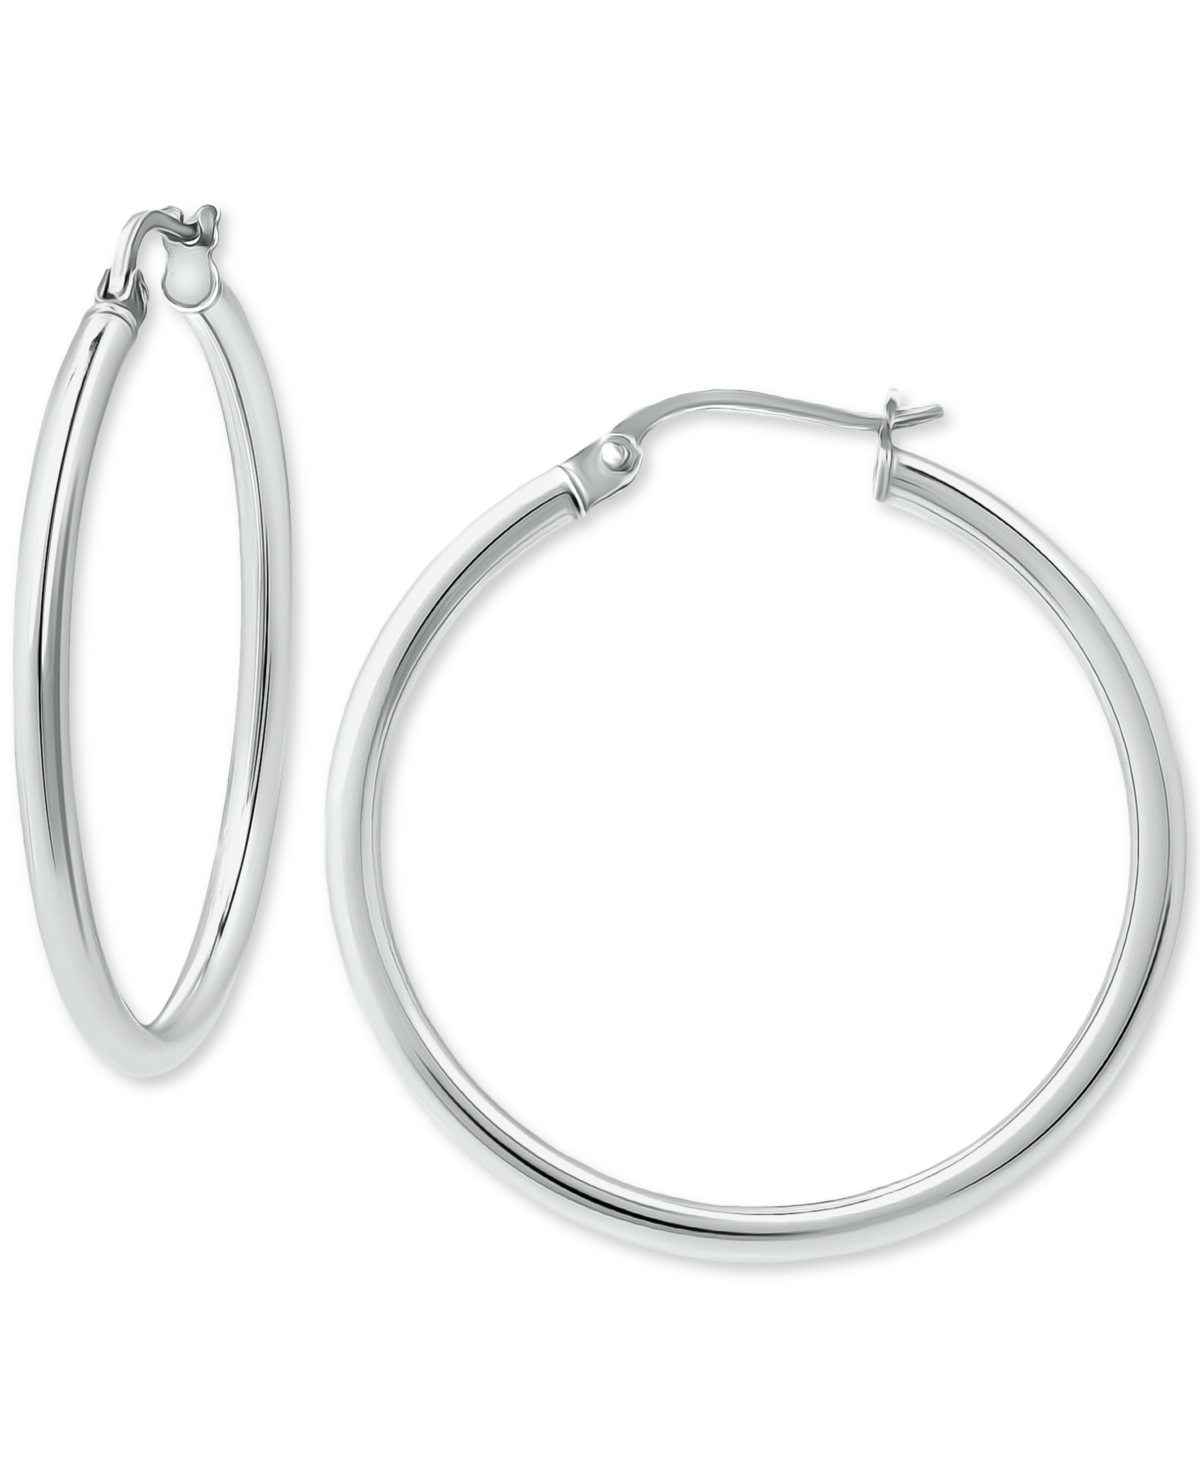 Giani Bernini Polished Small Hoop Earrings in Sterling Silver, 1", Created for Macy's